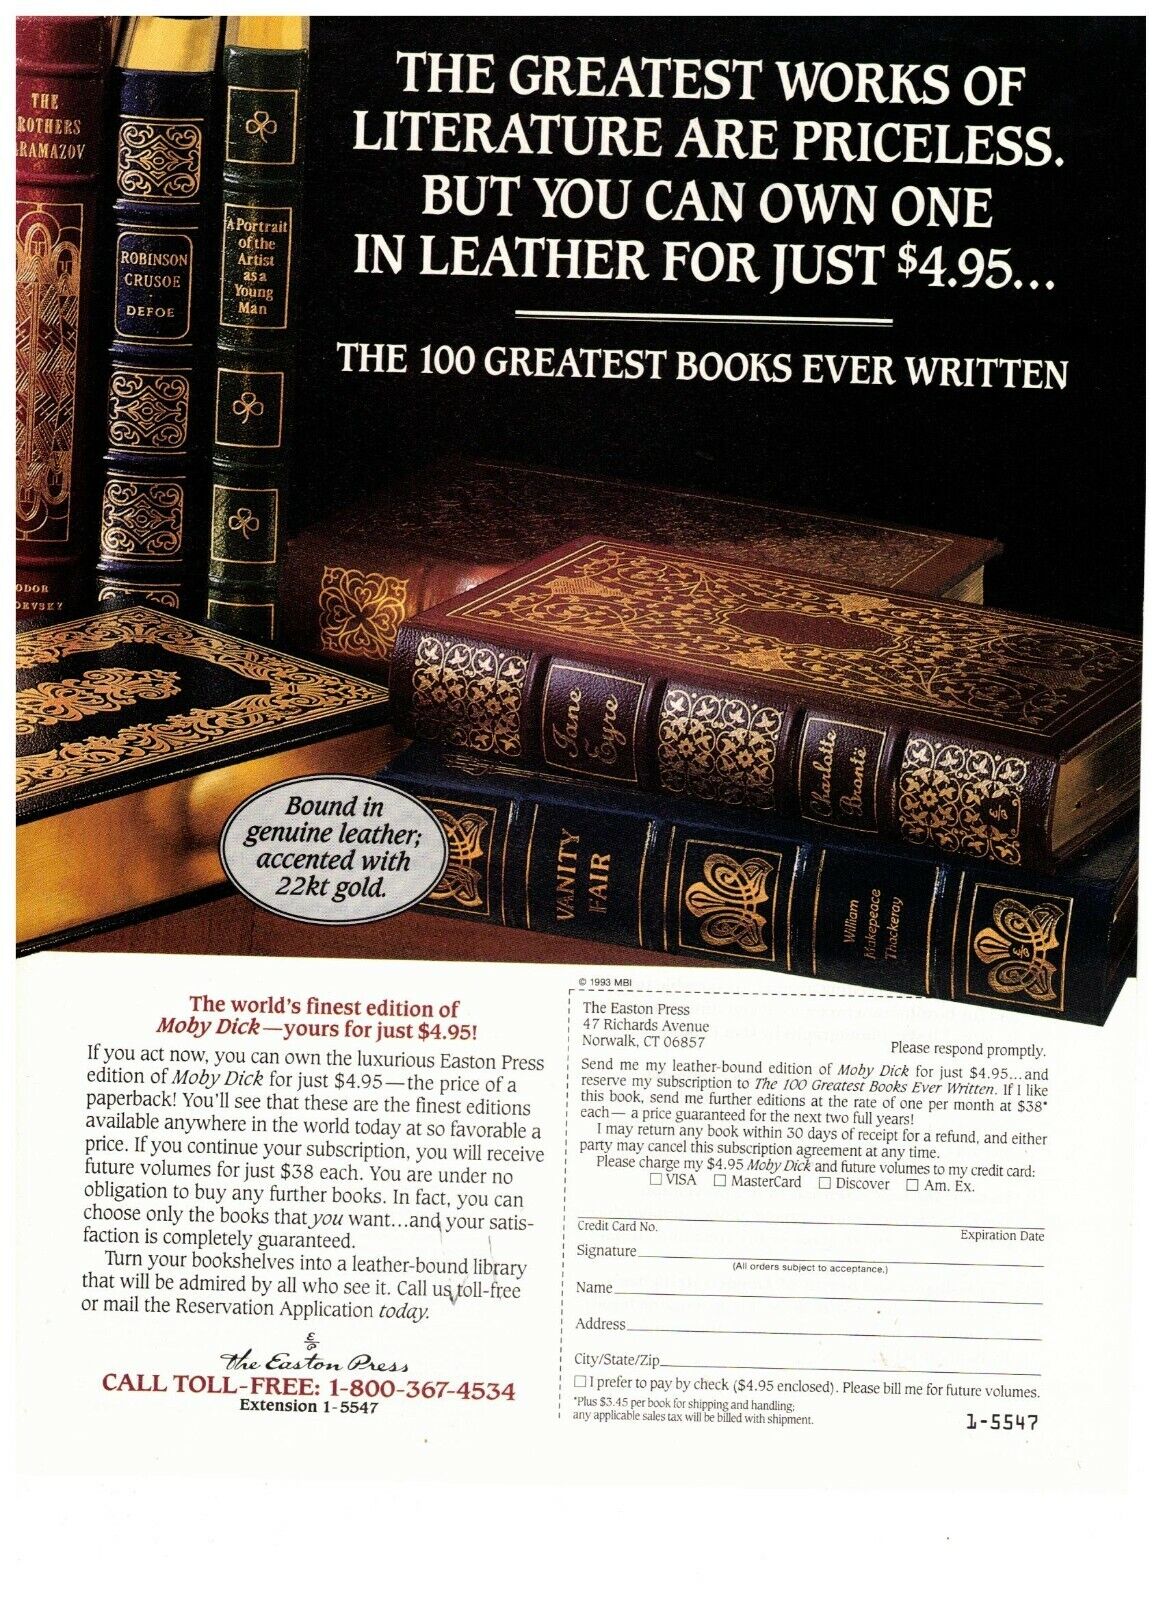 The Easton Press Greatest Works of Literature Mail Order Vintage 1995 Print Ad